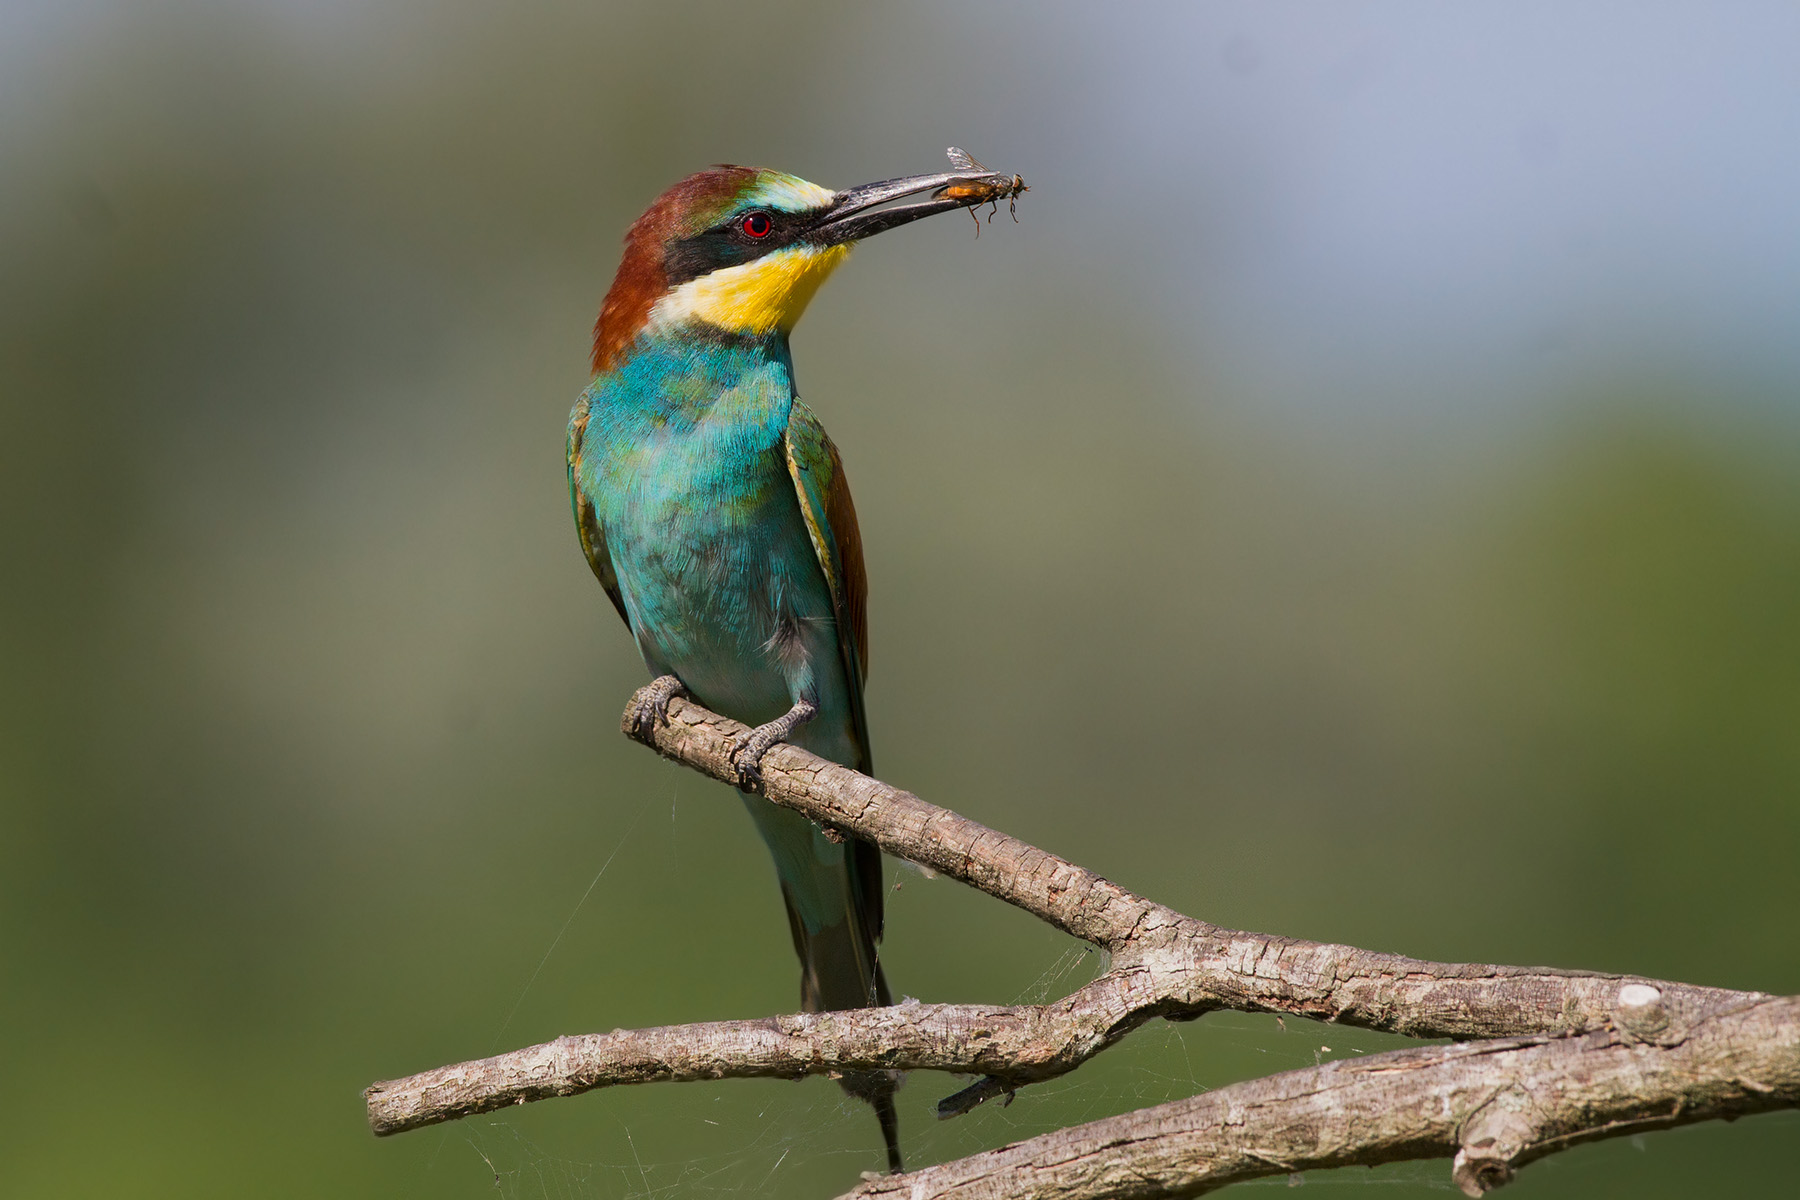 Eater with bombus - Bee eater with bombus...